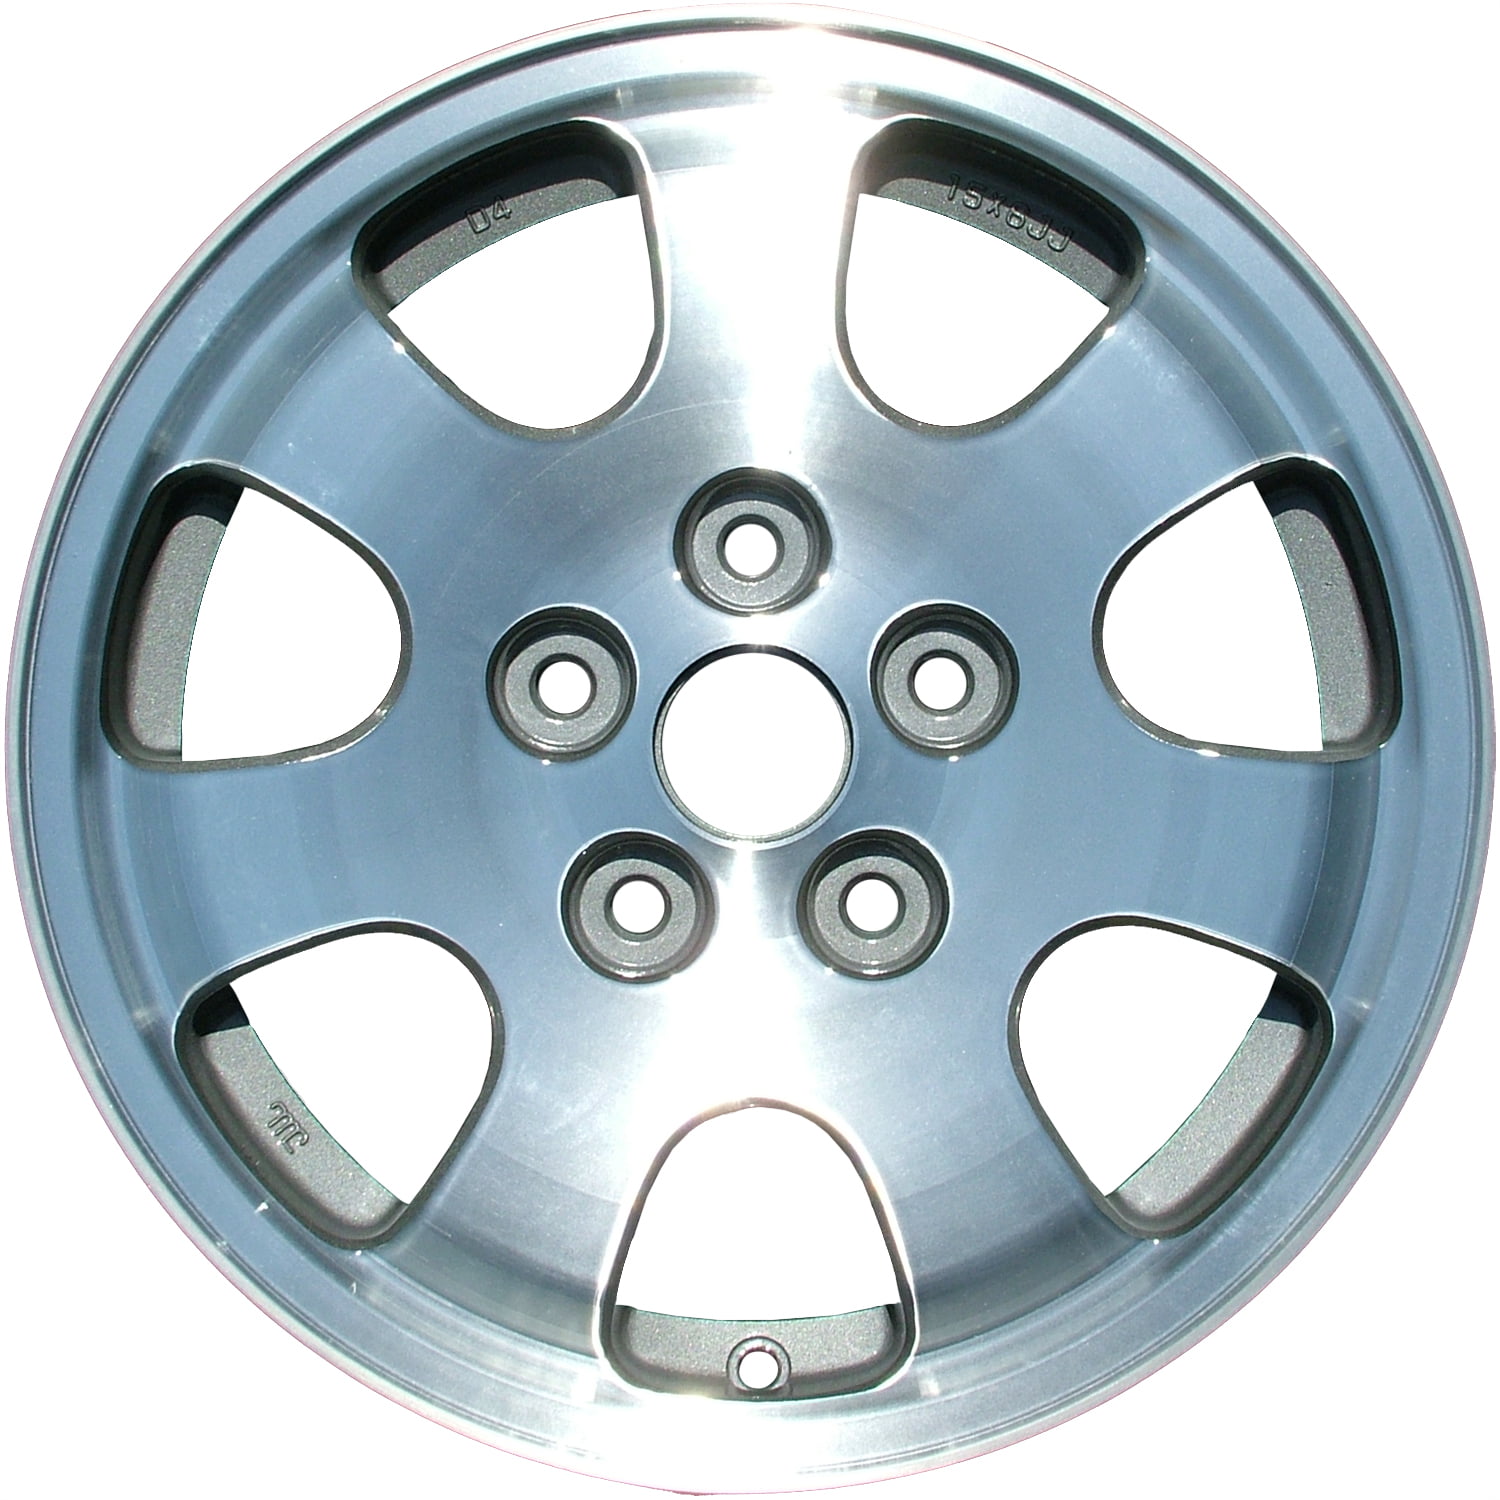 One factory 1998 to 2002 Mazda 626 15 inch hubcap wheel cover 